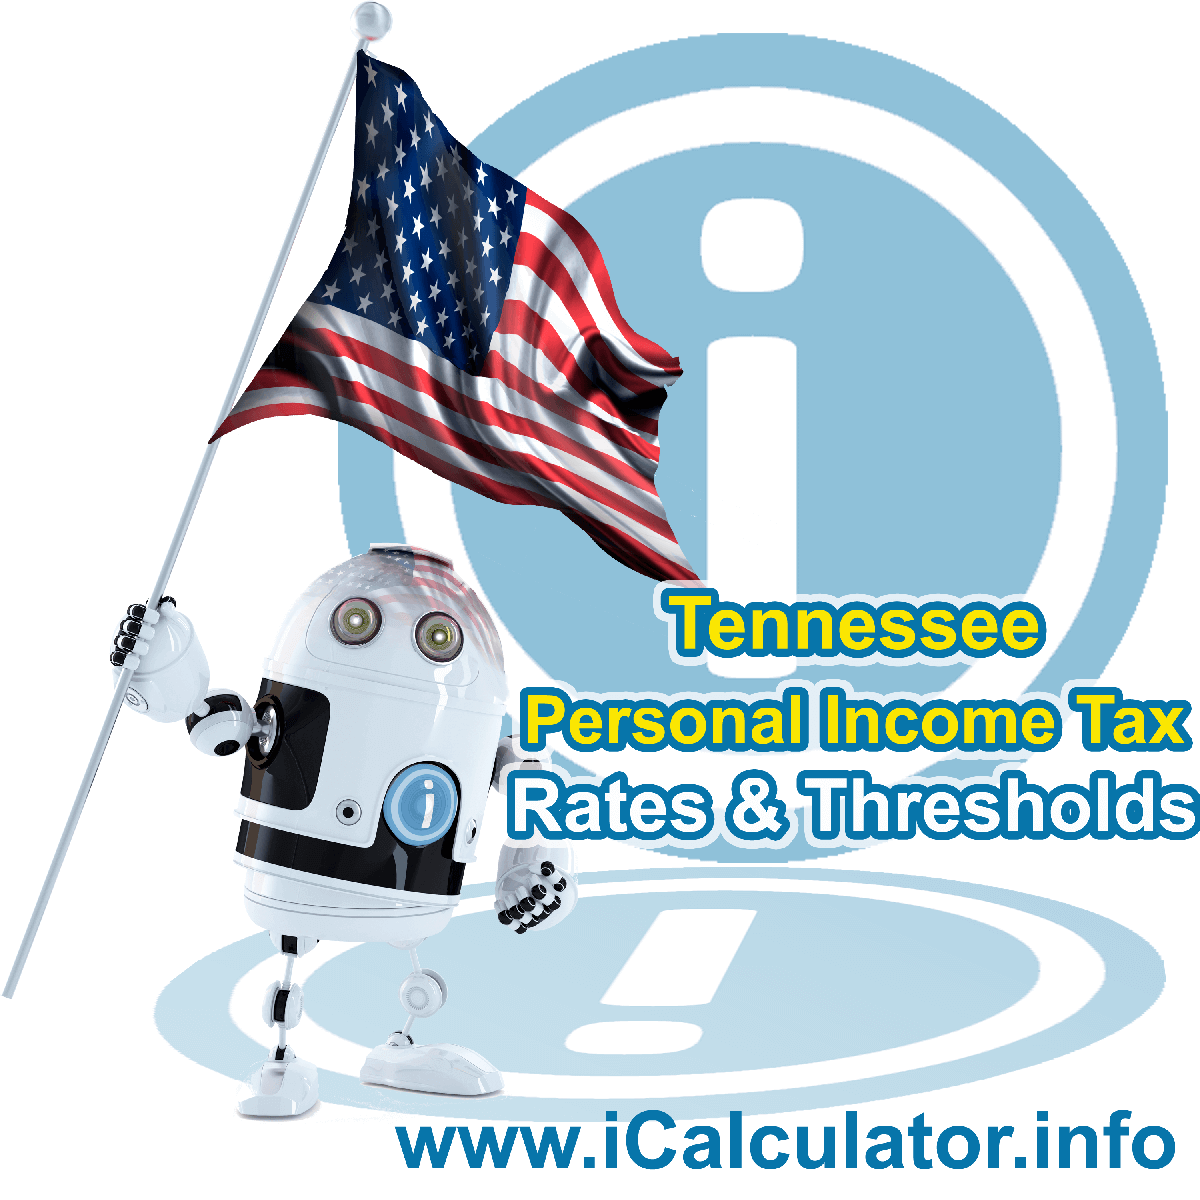 Tennessee State Tax Tables 2015. This image displays details of the Tennessee State Tax Tables for the 2015 tax return year which is provided in support of the 2015 US Tax Calculator